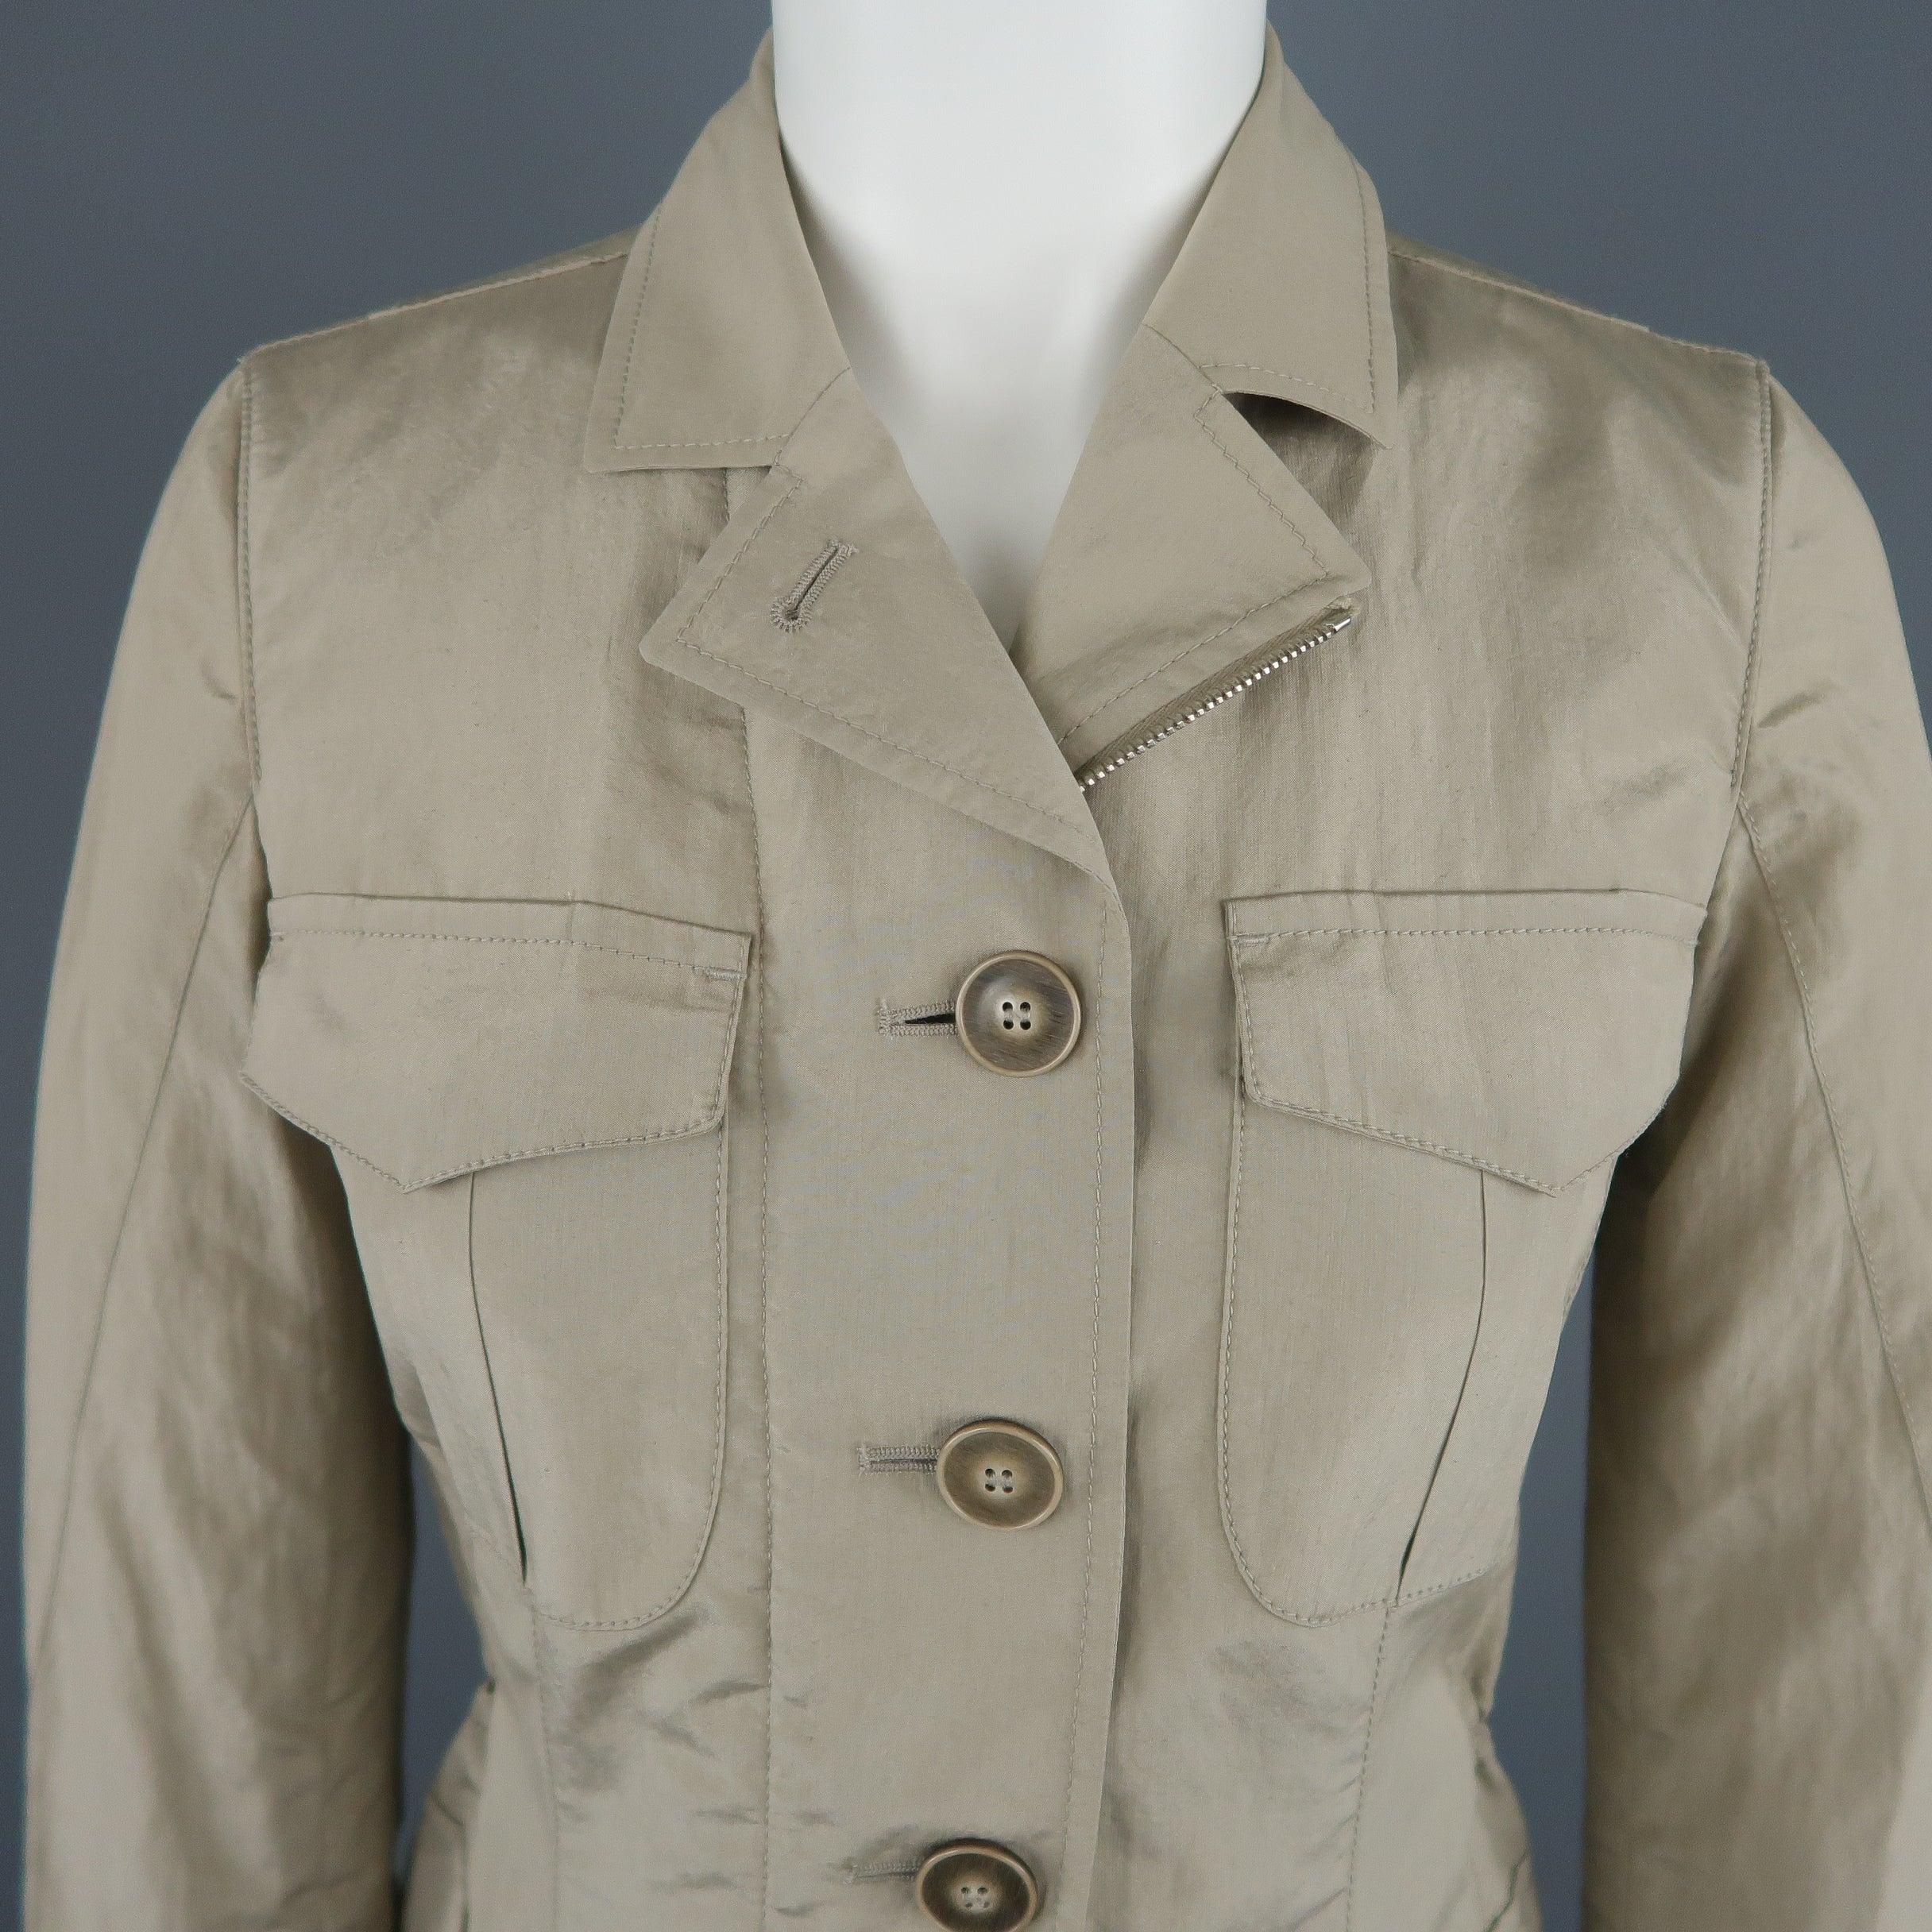 GIORGIO ARMANI Safari style jacket comes in khaki silk blend taffeta with a double zip and button closure, patch flap pockets, pointed collar, functional button cuffs, and elastic drawstring waist. Made in Italy.
Excellent Pre-Owned Condition.
